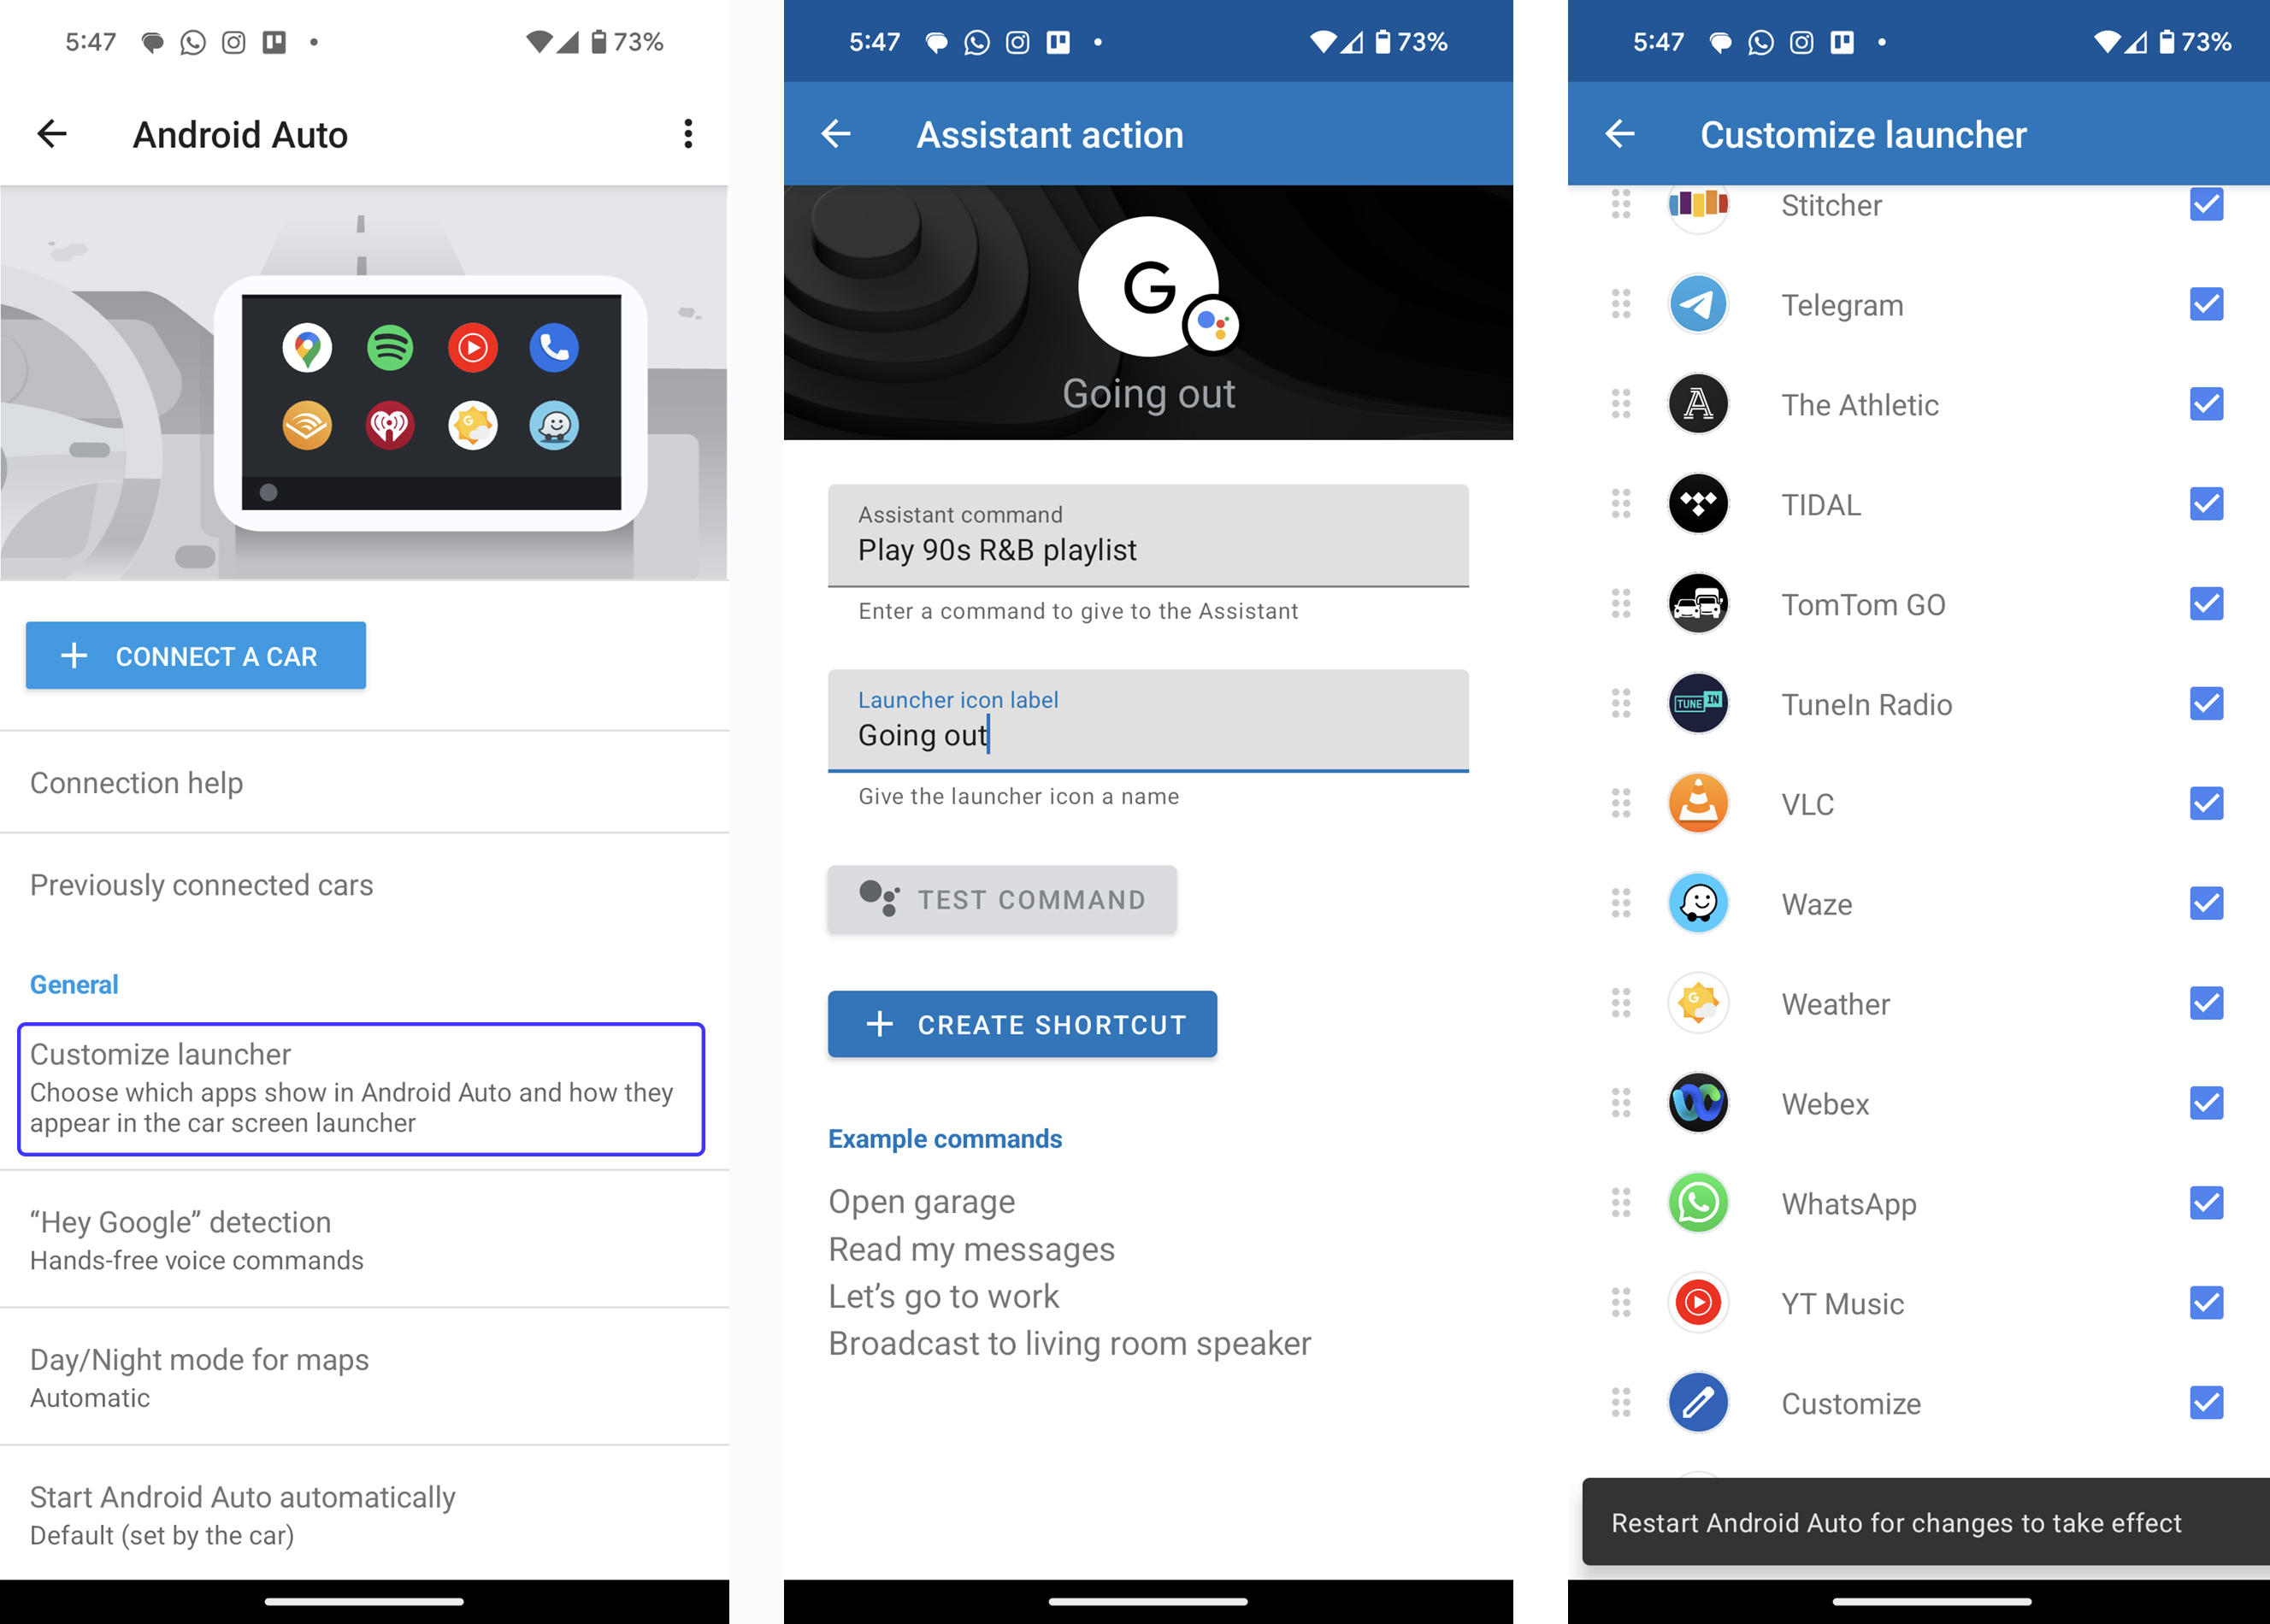 Screenshots showing initial setup for Routines in Android Auto.